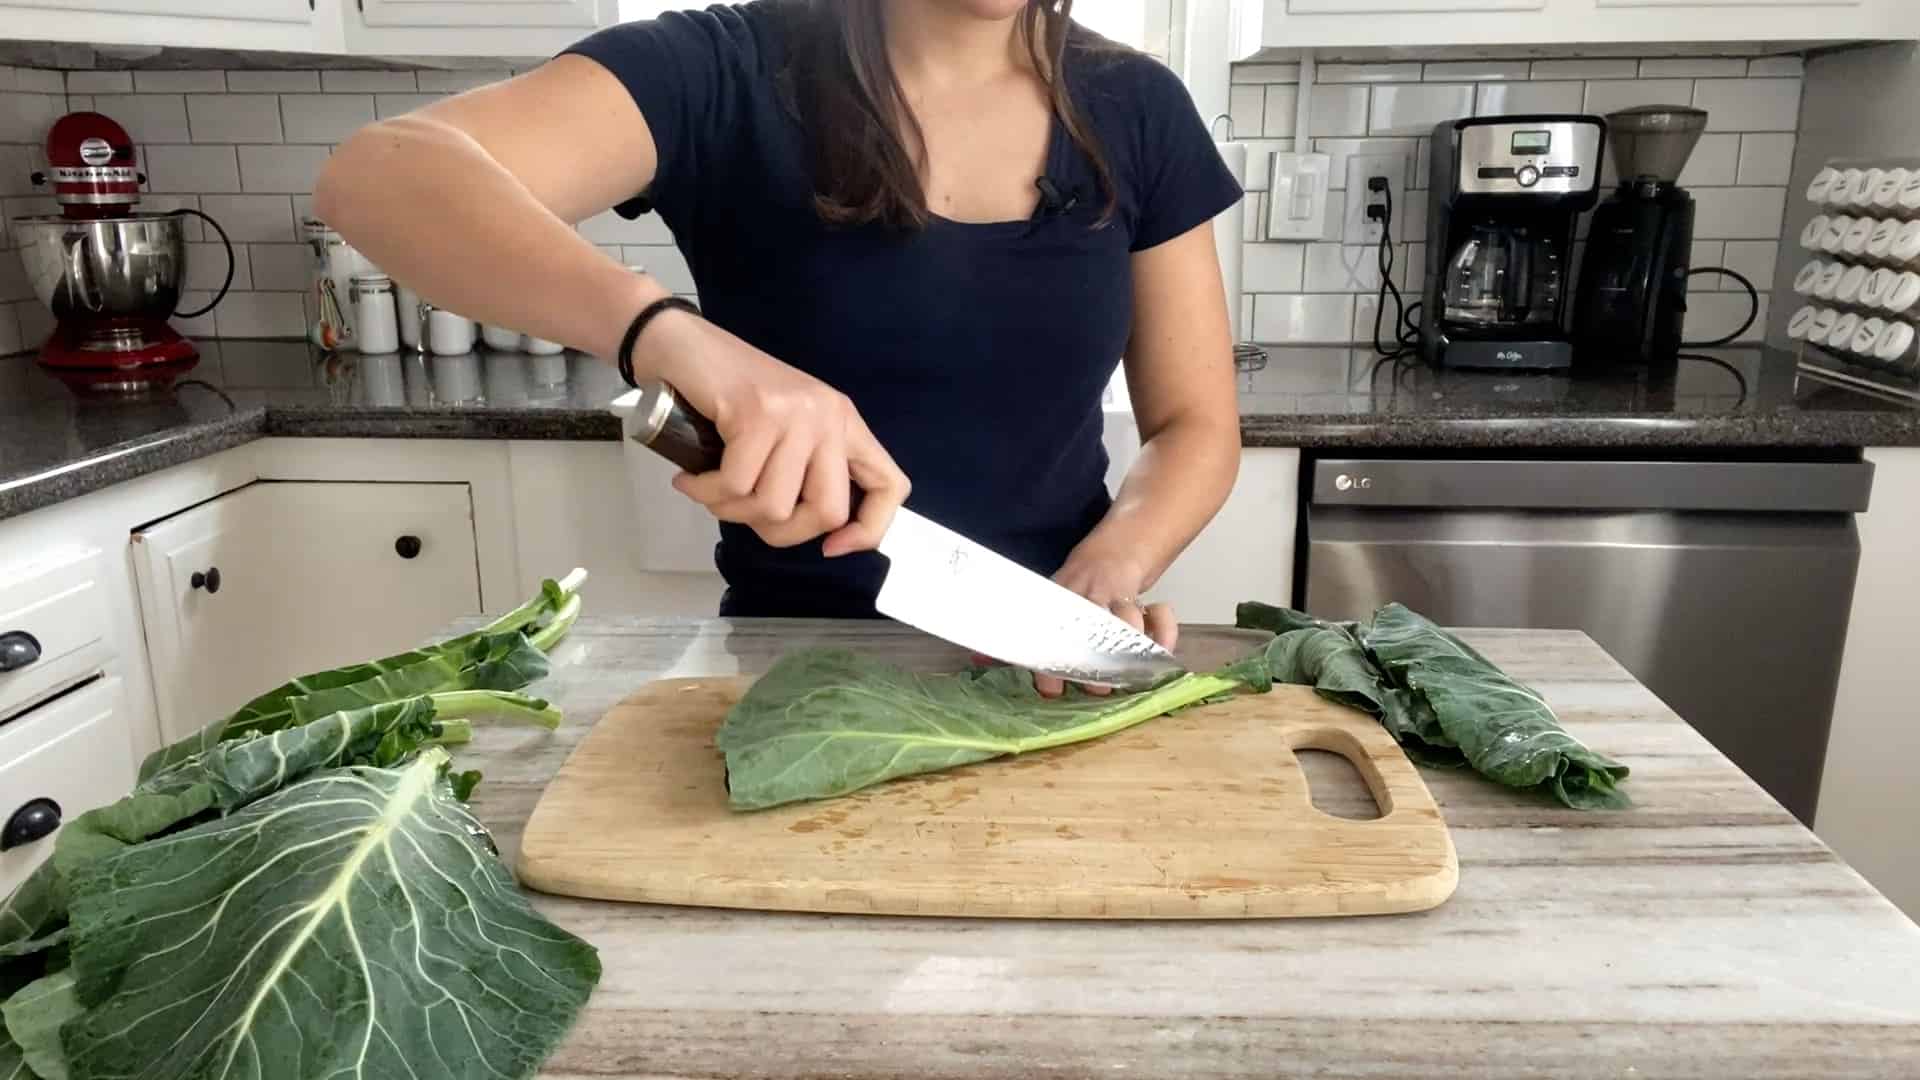 woman slicing collard green leaves from their stems to cut into pieces